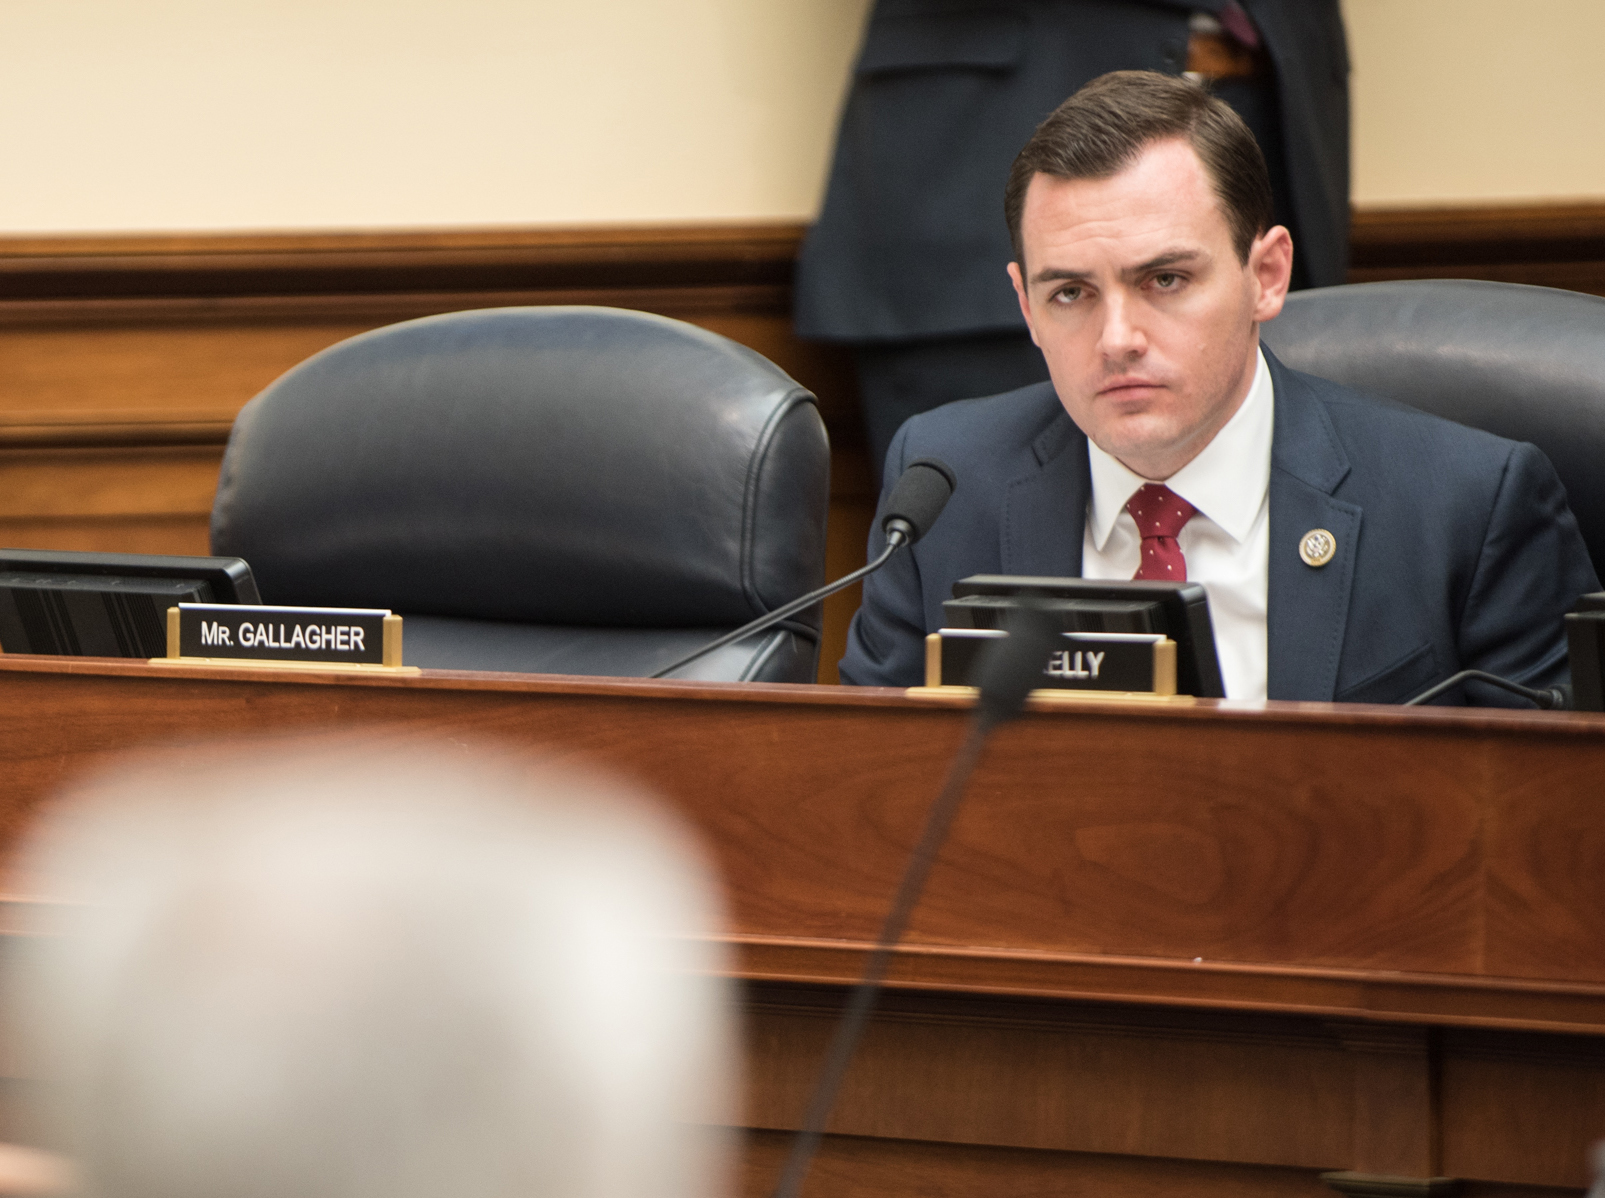 GOP Congressman: Reversing 2020 Election Results Would ‘Destroy The Idea Of American Government’